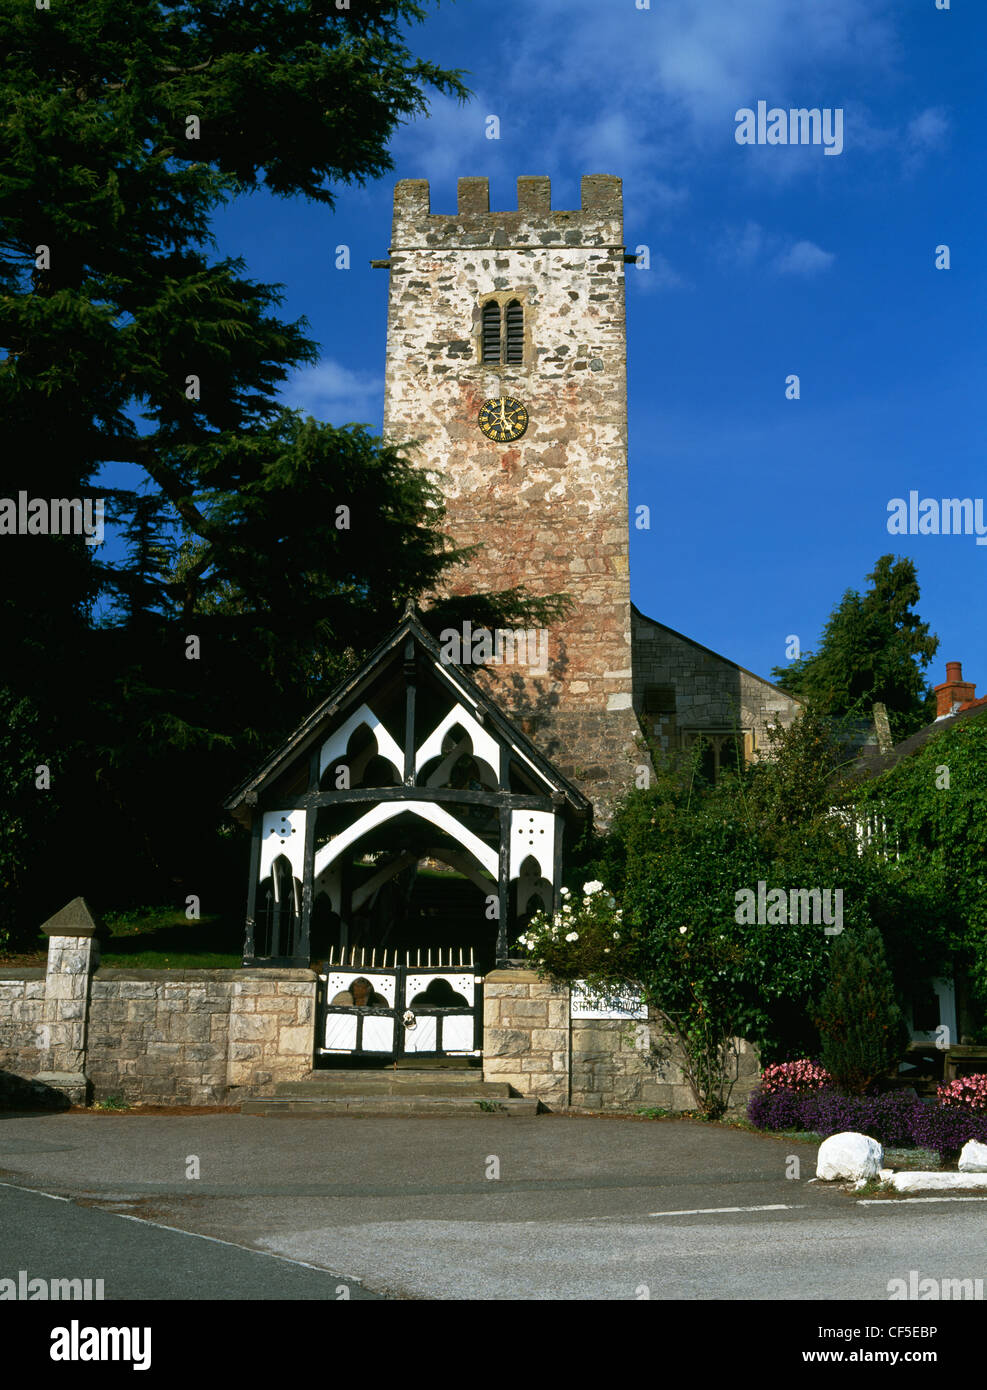 The Perpendicular tower and timber-framed lychgate of St Stephen's Church. Stock Photo